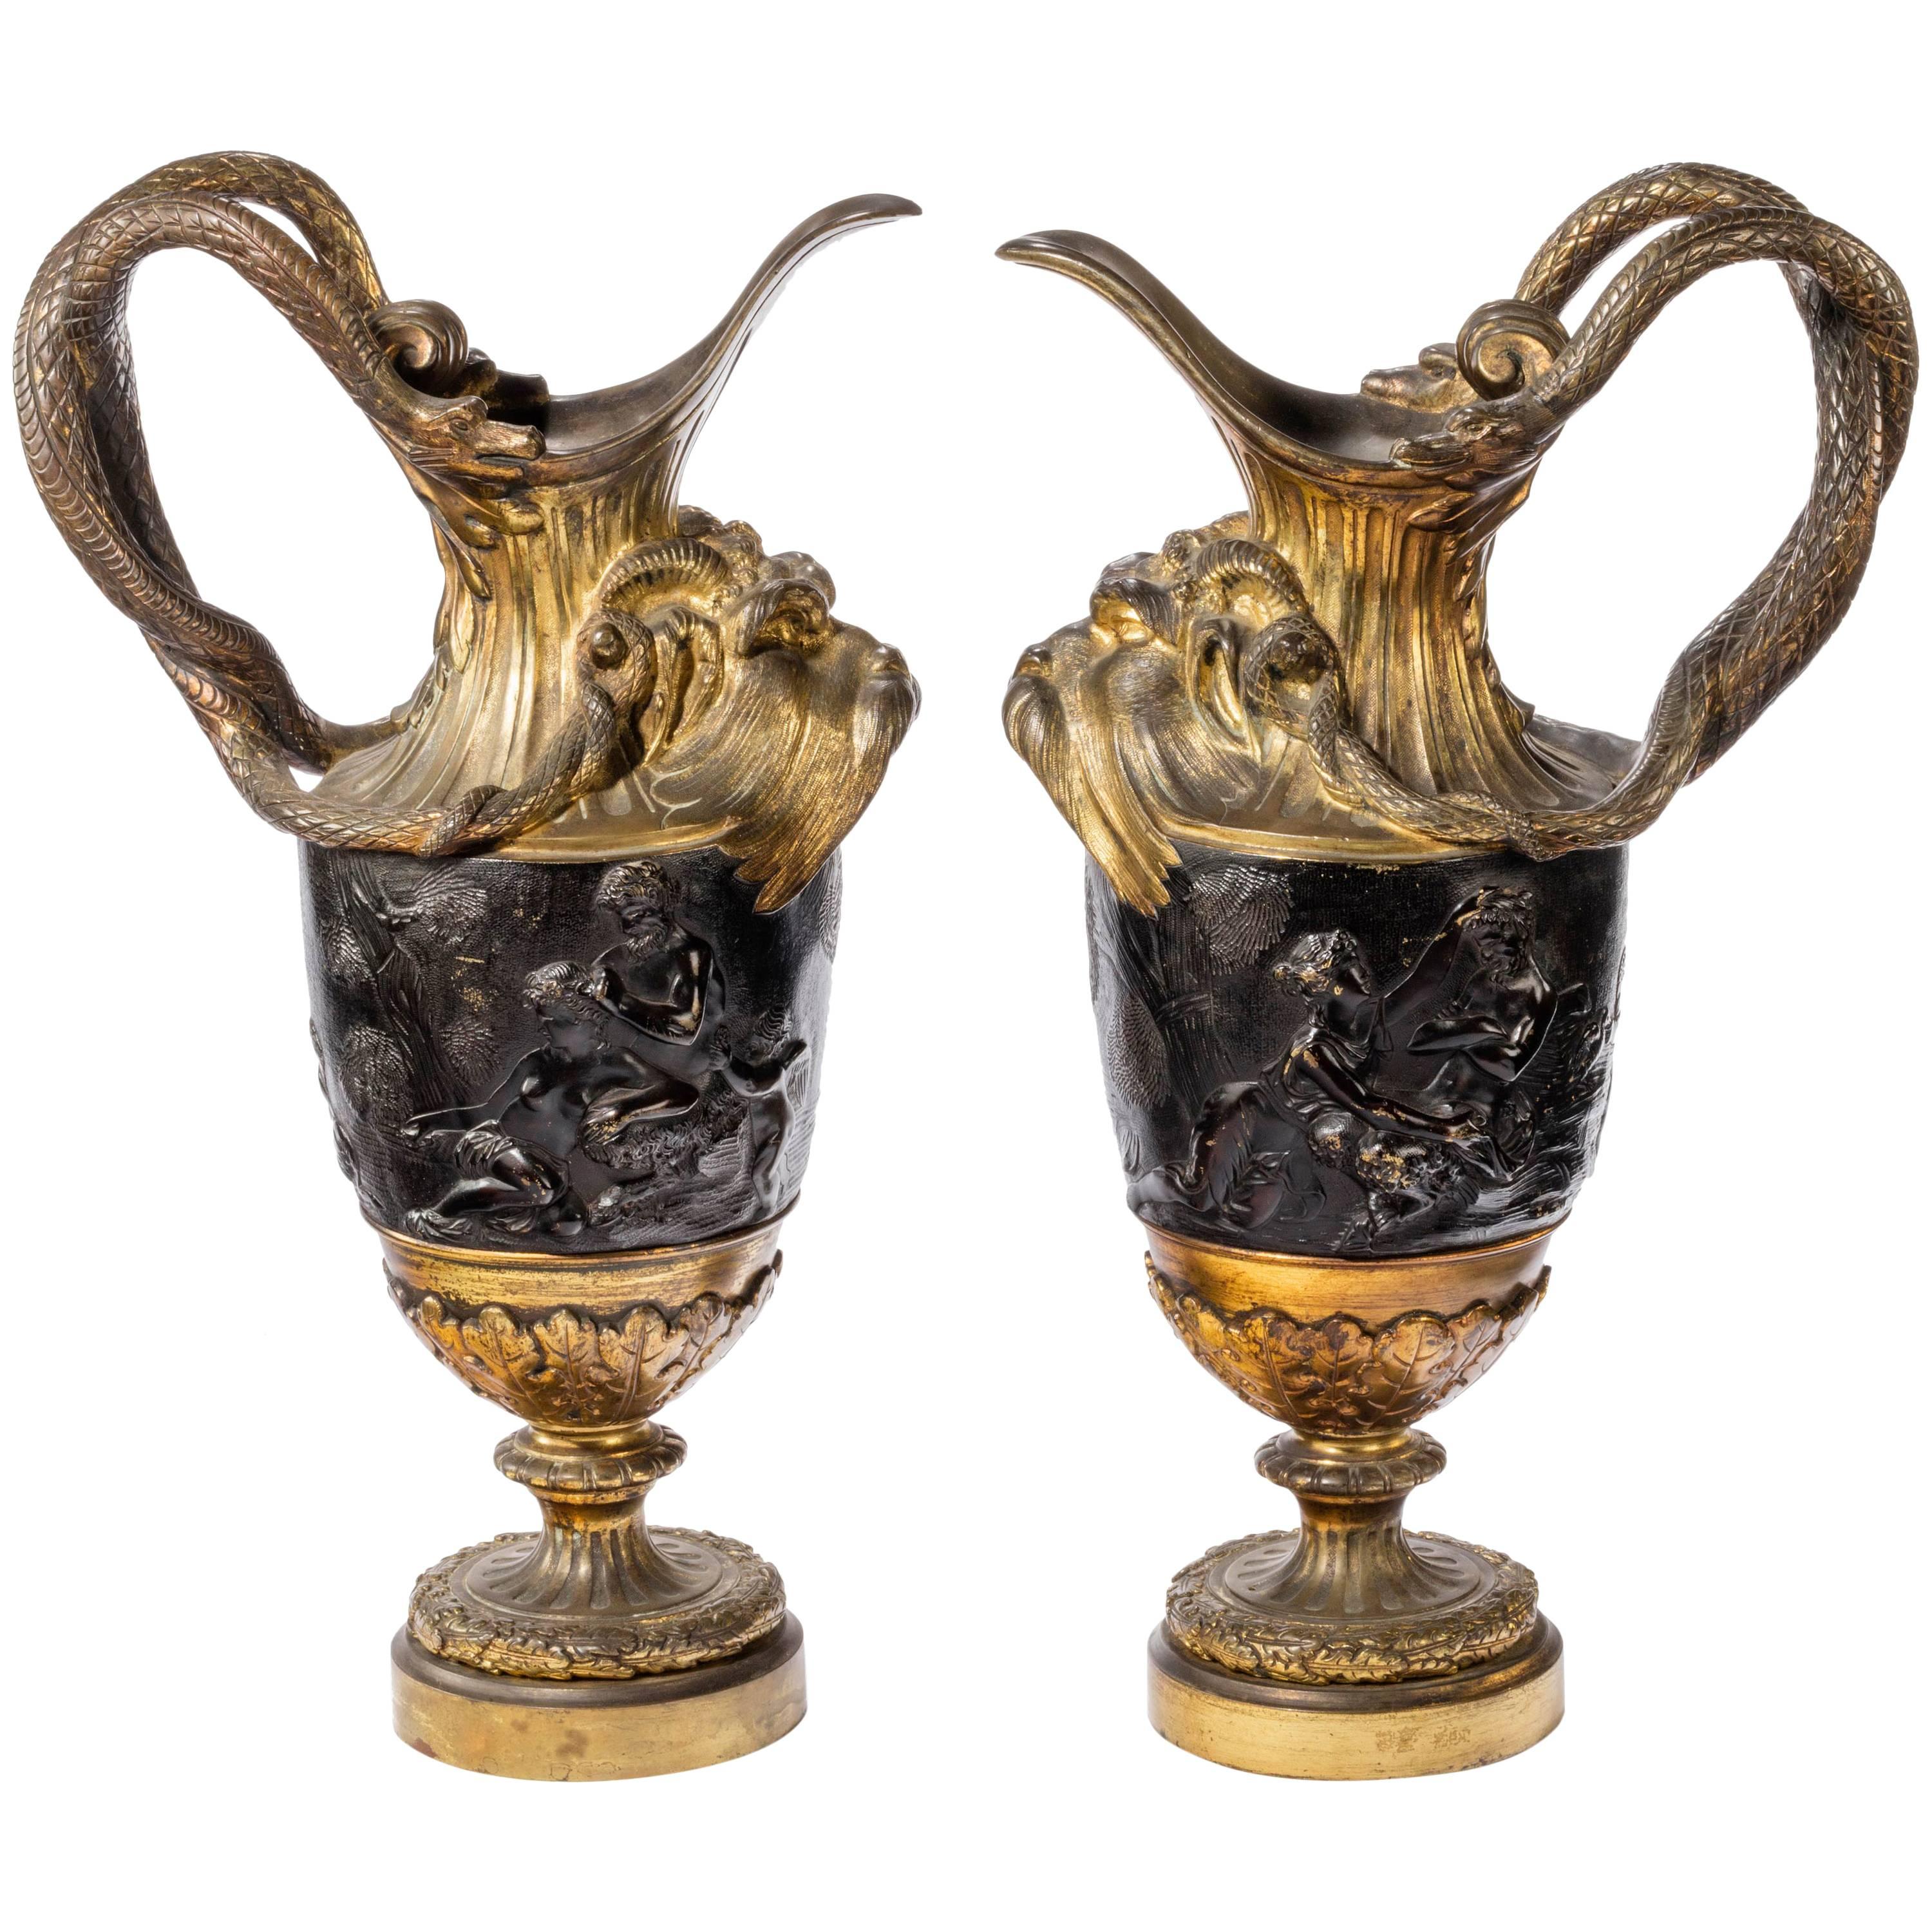 Pair of Late 18th Century, Bronze and Gilt Bronze Ewers in the Manner of Clodion